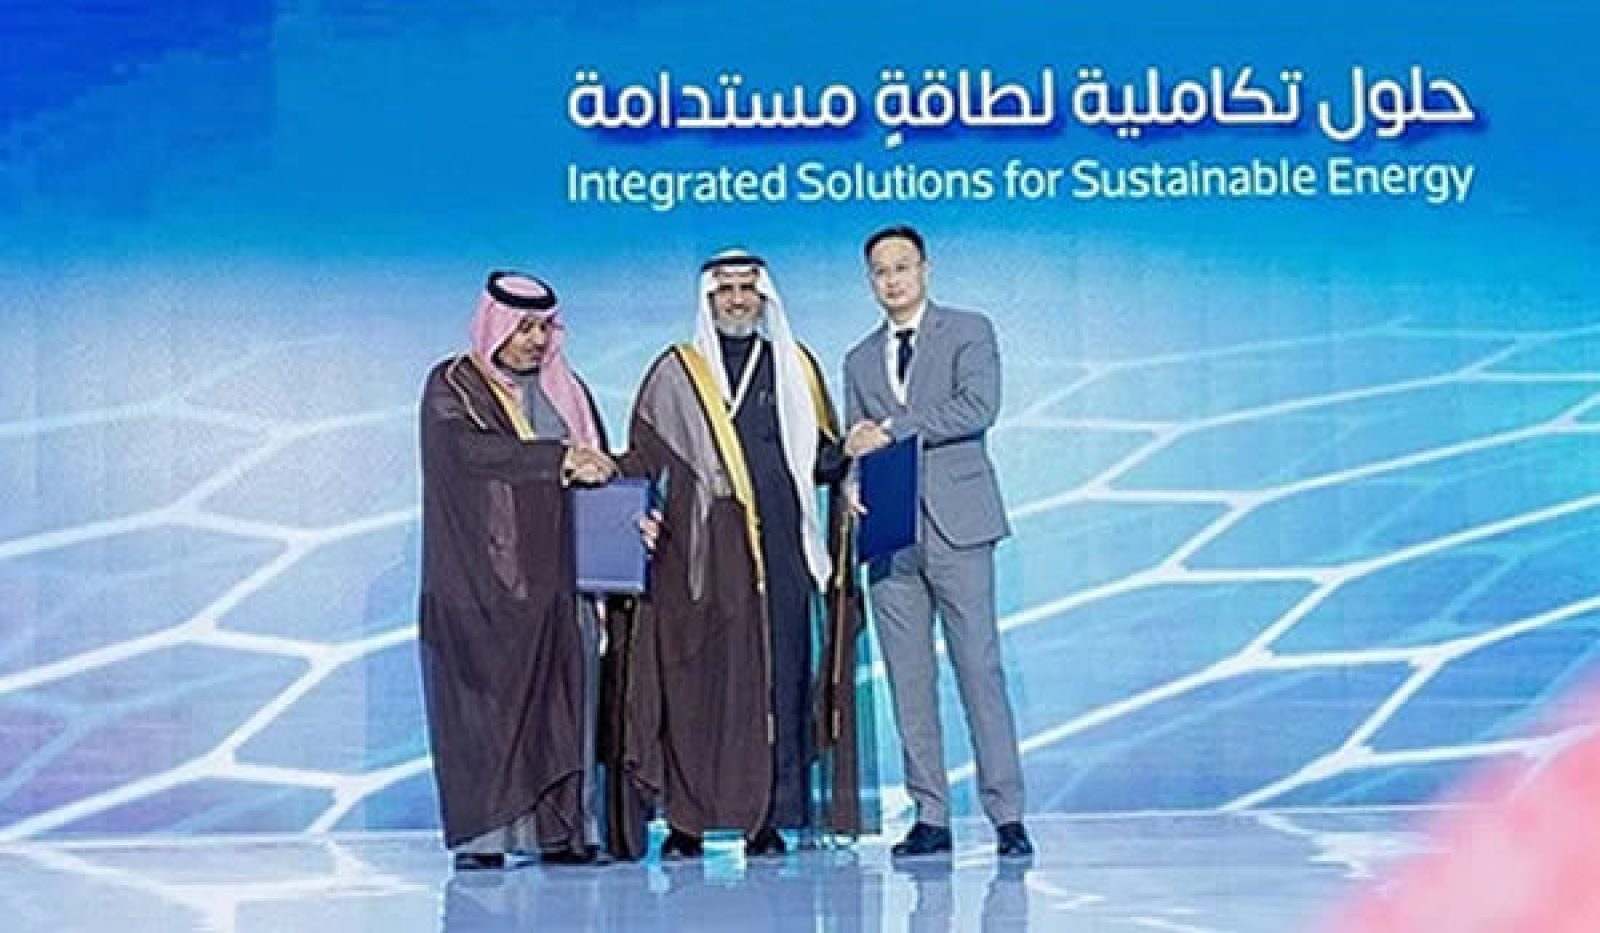 Saudi Electricity Co. Signs Contracts Worth $720m to Implement Smart Grid Projects